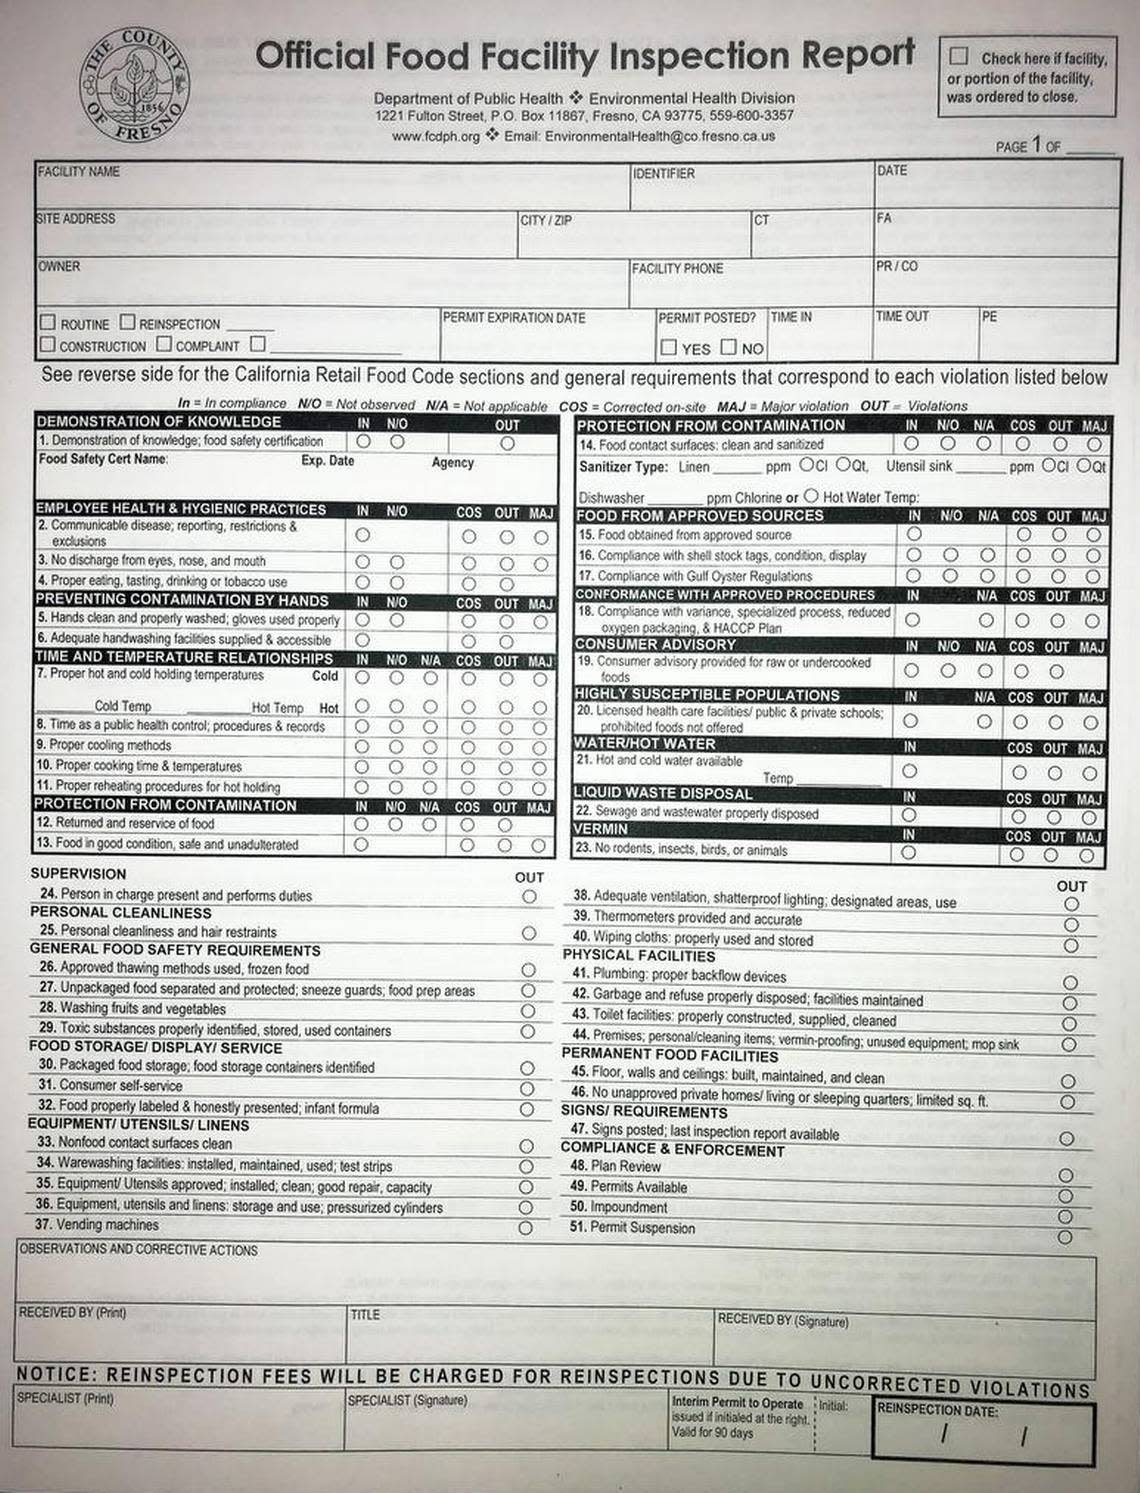 The first page of the form used by Fresno County health inspectors includes a checklist list of more than 50 factors that are checked for compliance with food handling and food safety regulations. Fresno County Environmental Health Division